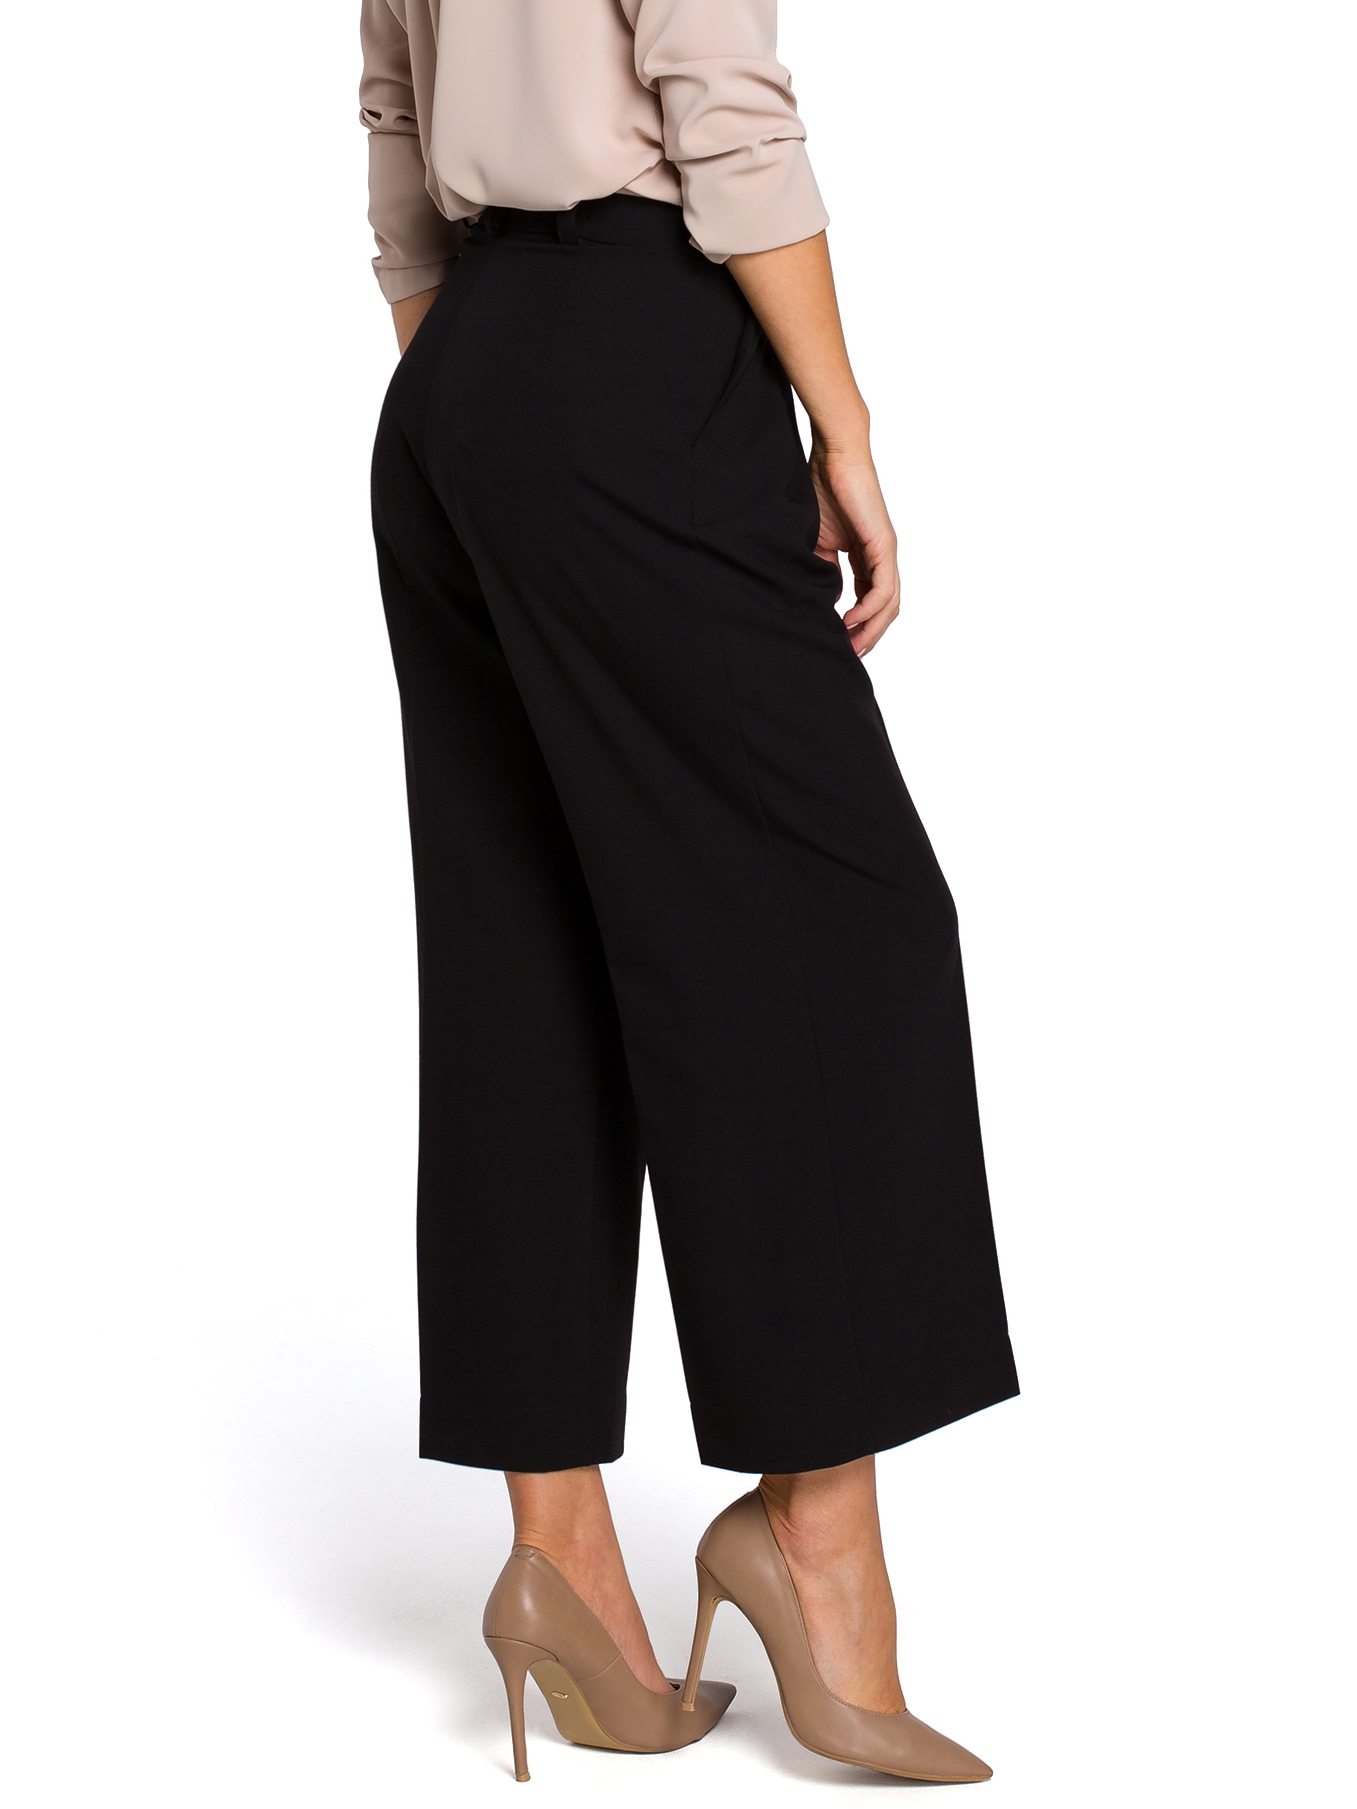 STYLE culottes musta S139